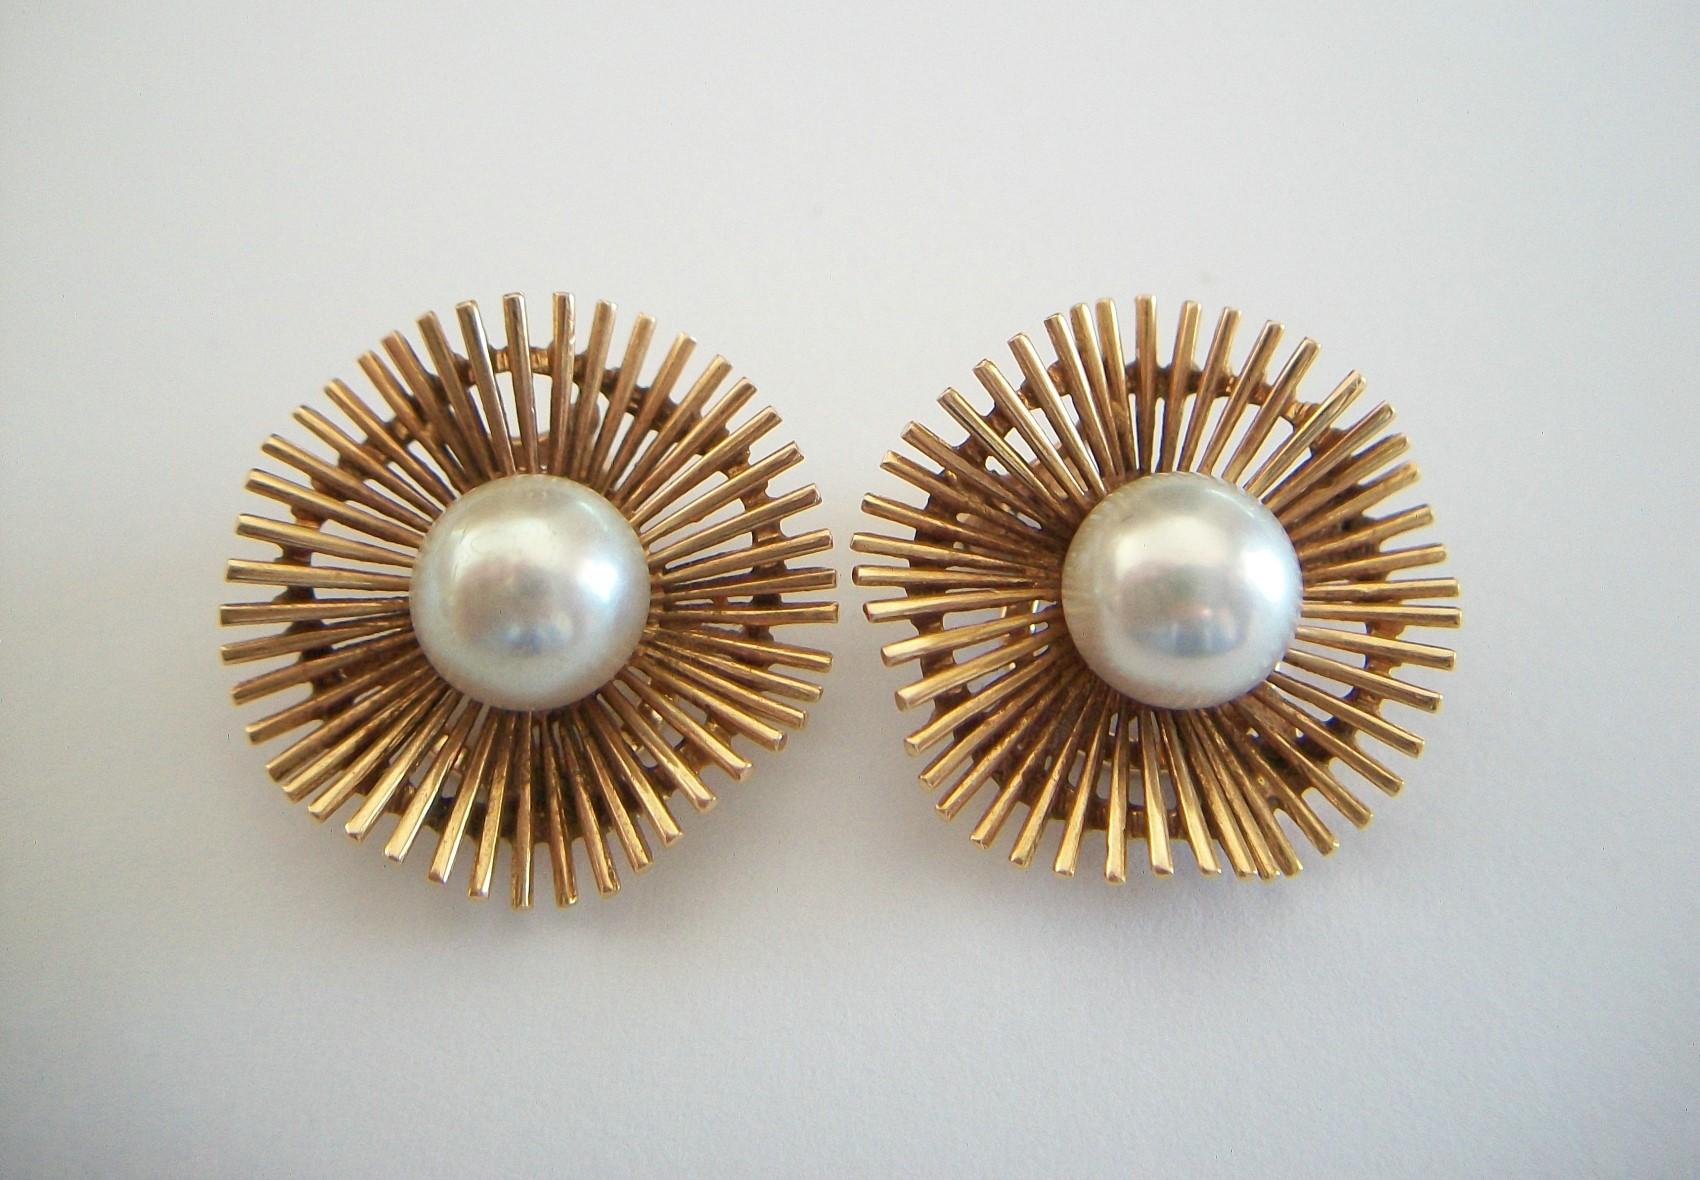 Modernist Starburst Cultured Pearl & 18k Gold Ear Clips, France, circa 1960s In Good Condition For Sale In Chatham, CA